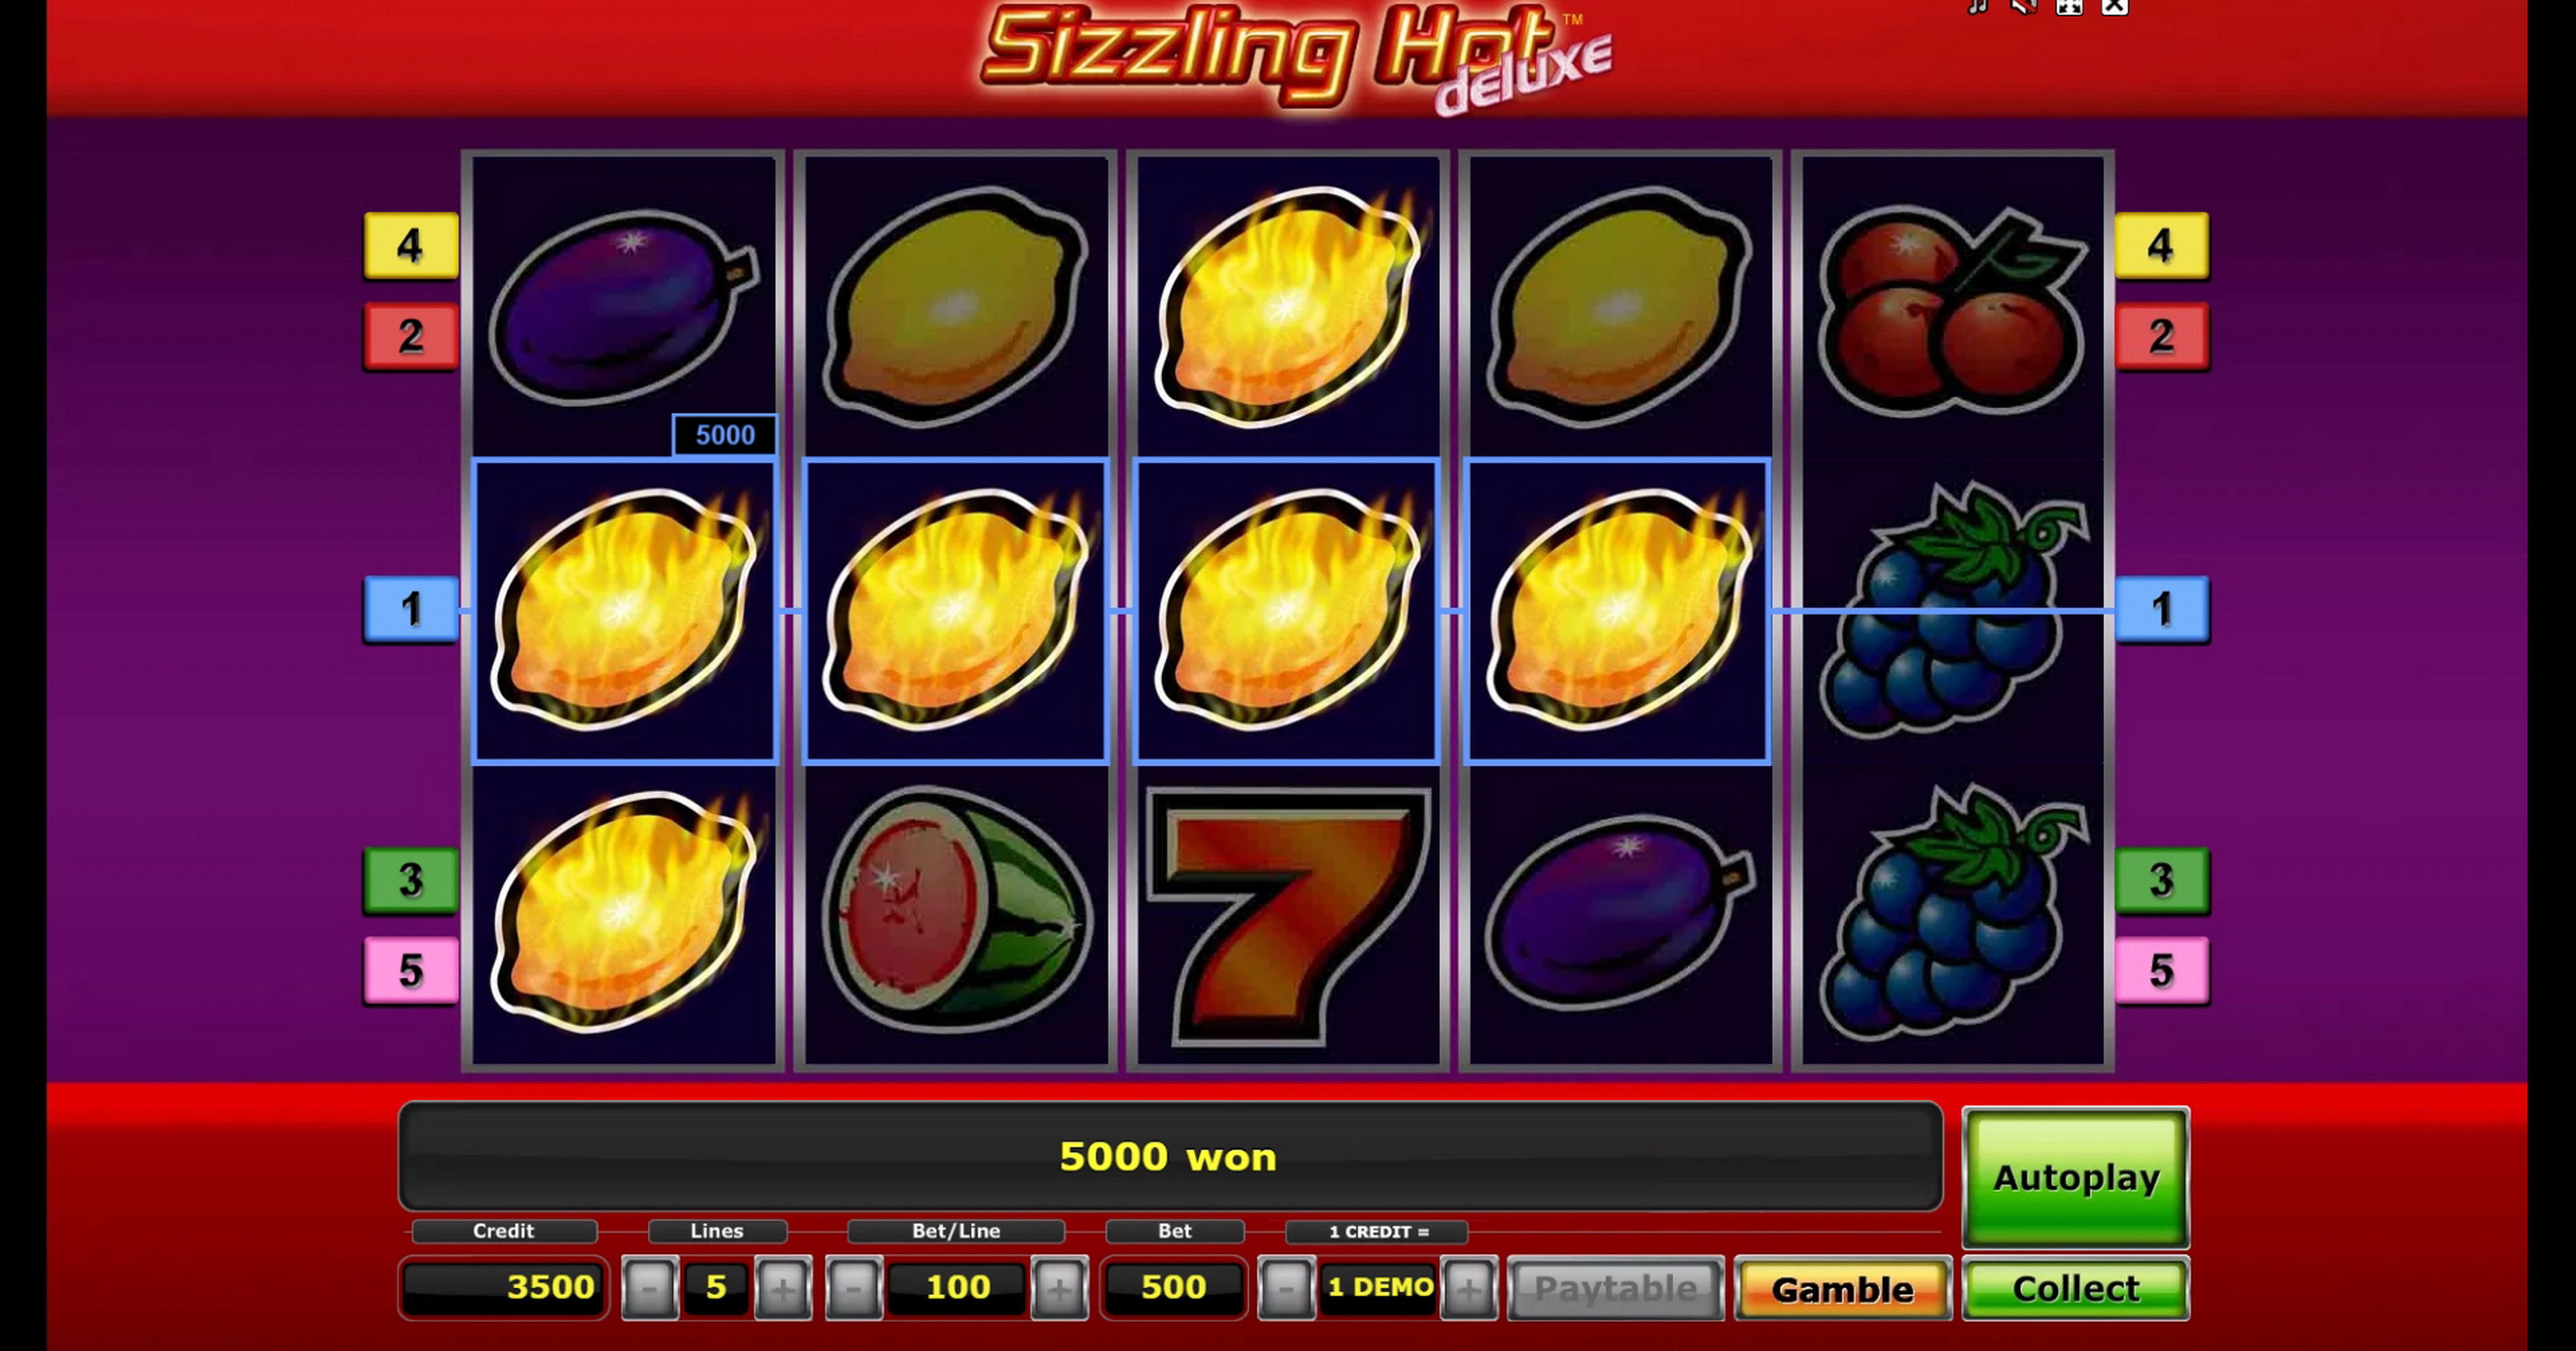 Win Money in Sizzling Hot deluxe Free Slot Game by Greentube